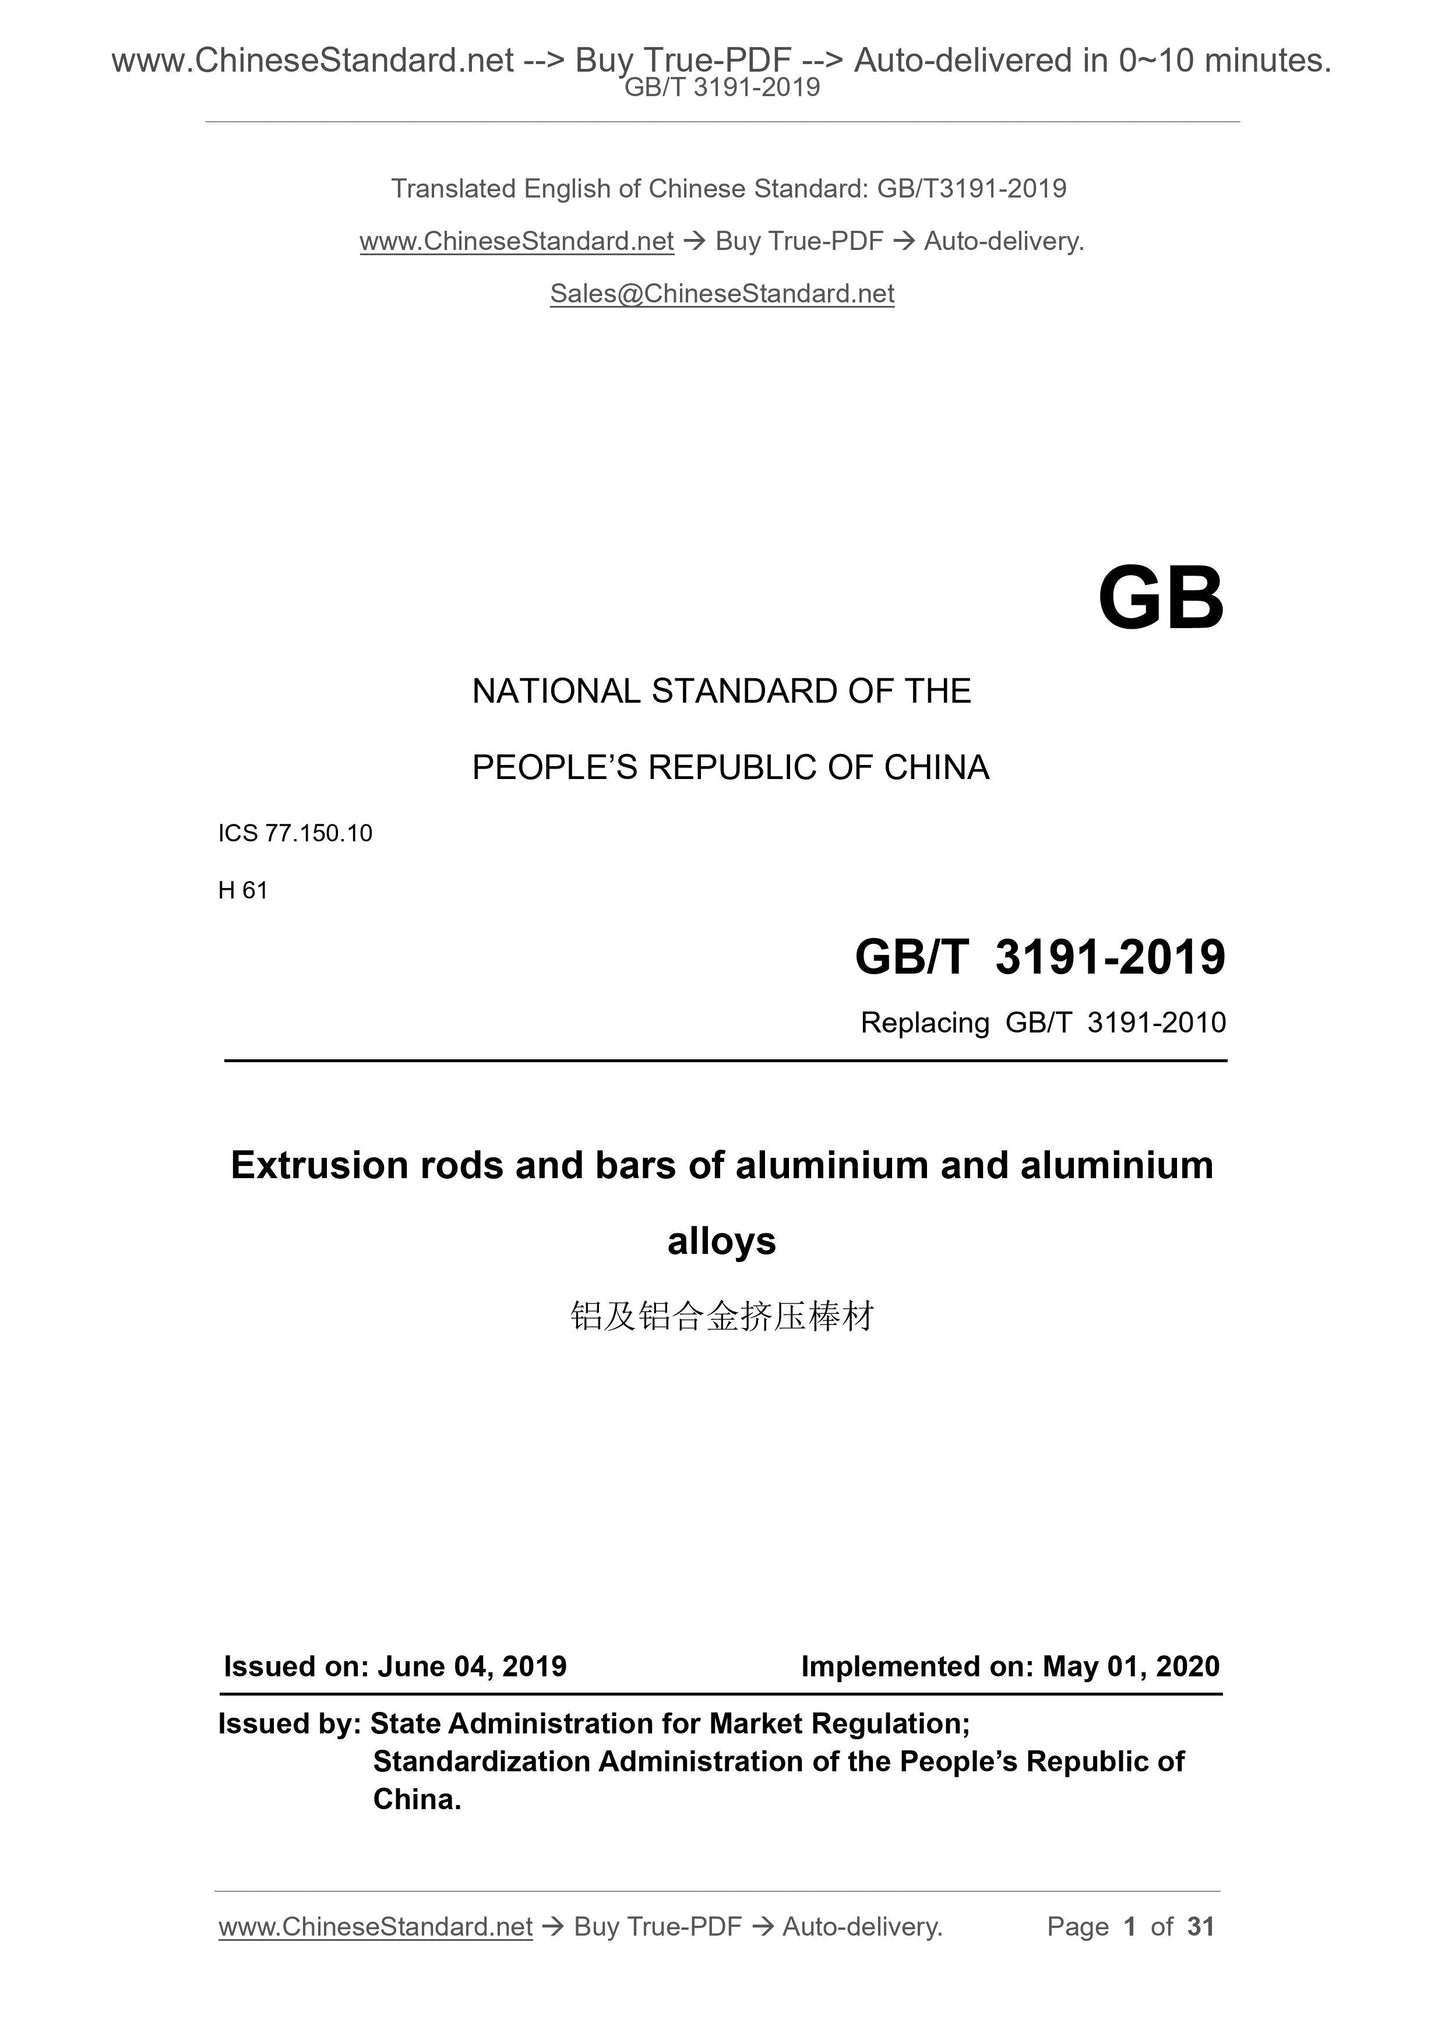 GB/T 3191-2019 Page 1